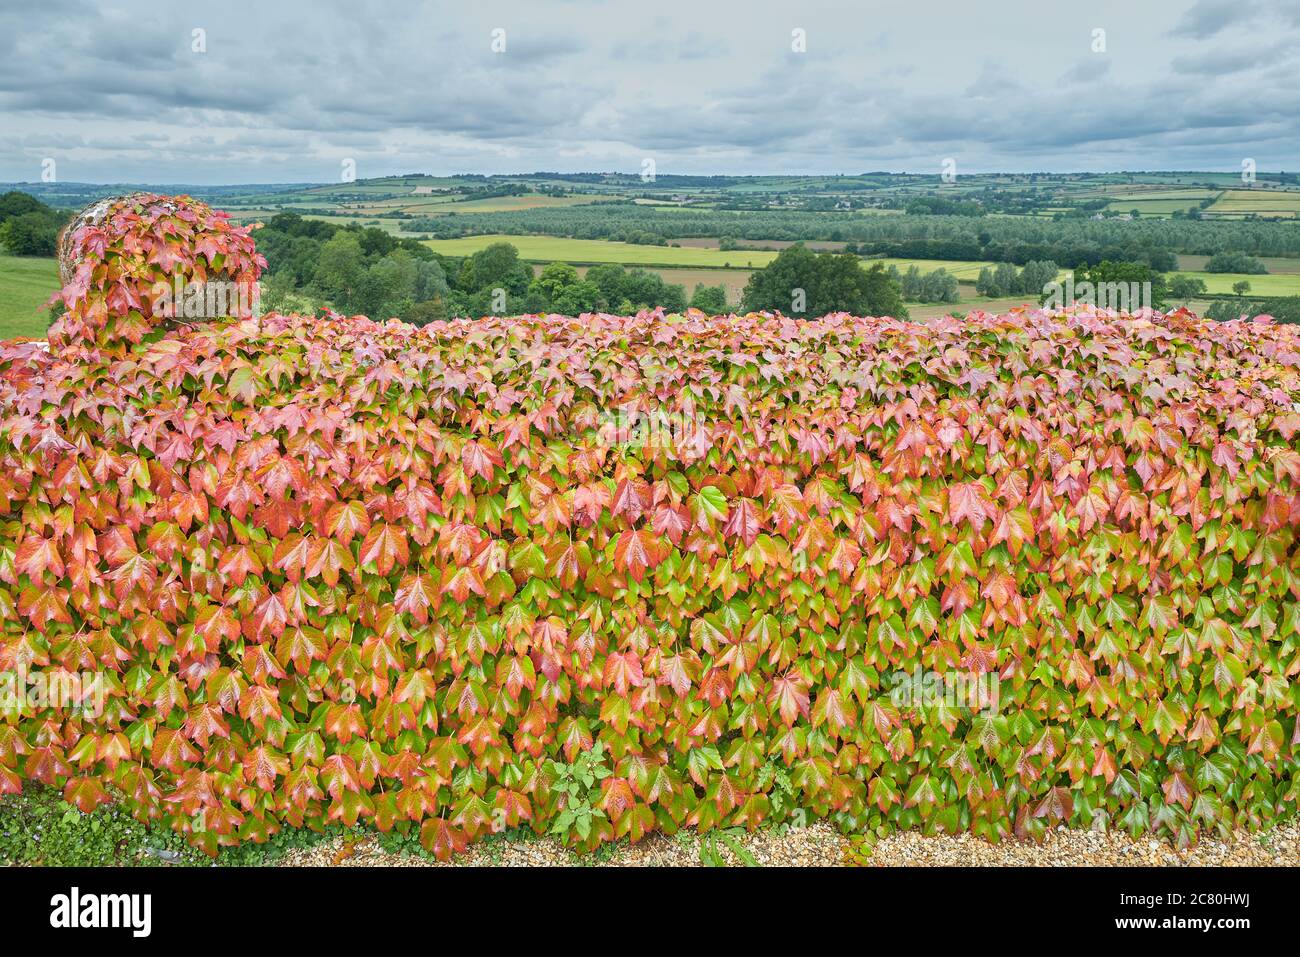 Red and green ivy covers the rampart wall of  Rockingham castle overlooking the Welland valley at Corby, England. Stock Photo